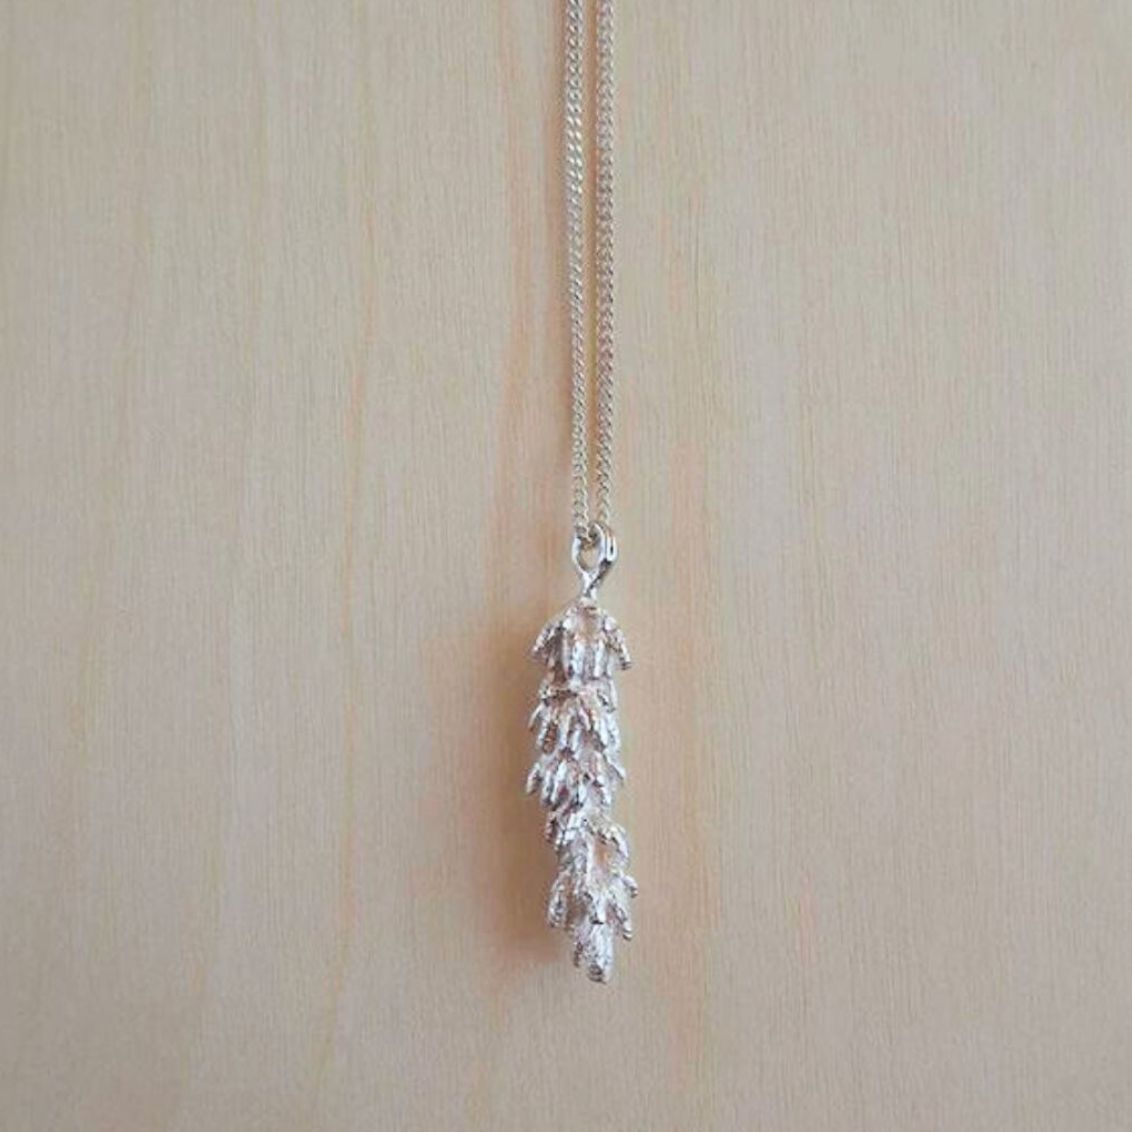 Lavender Necklace in Sterling Silver